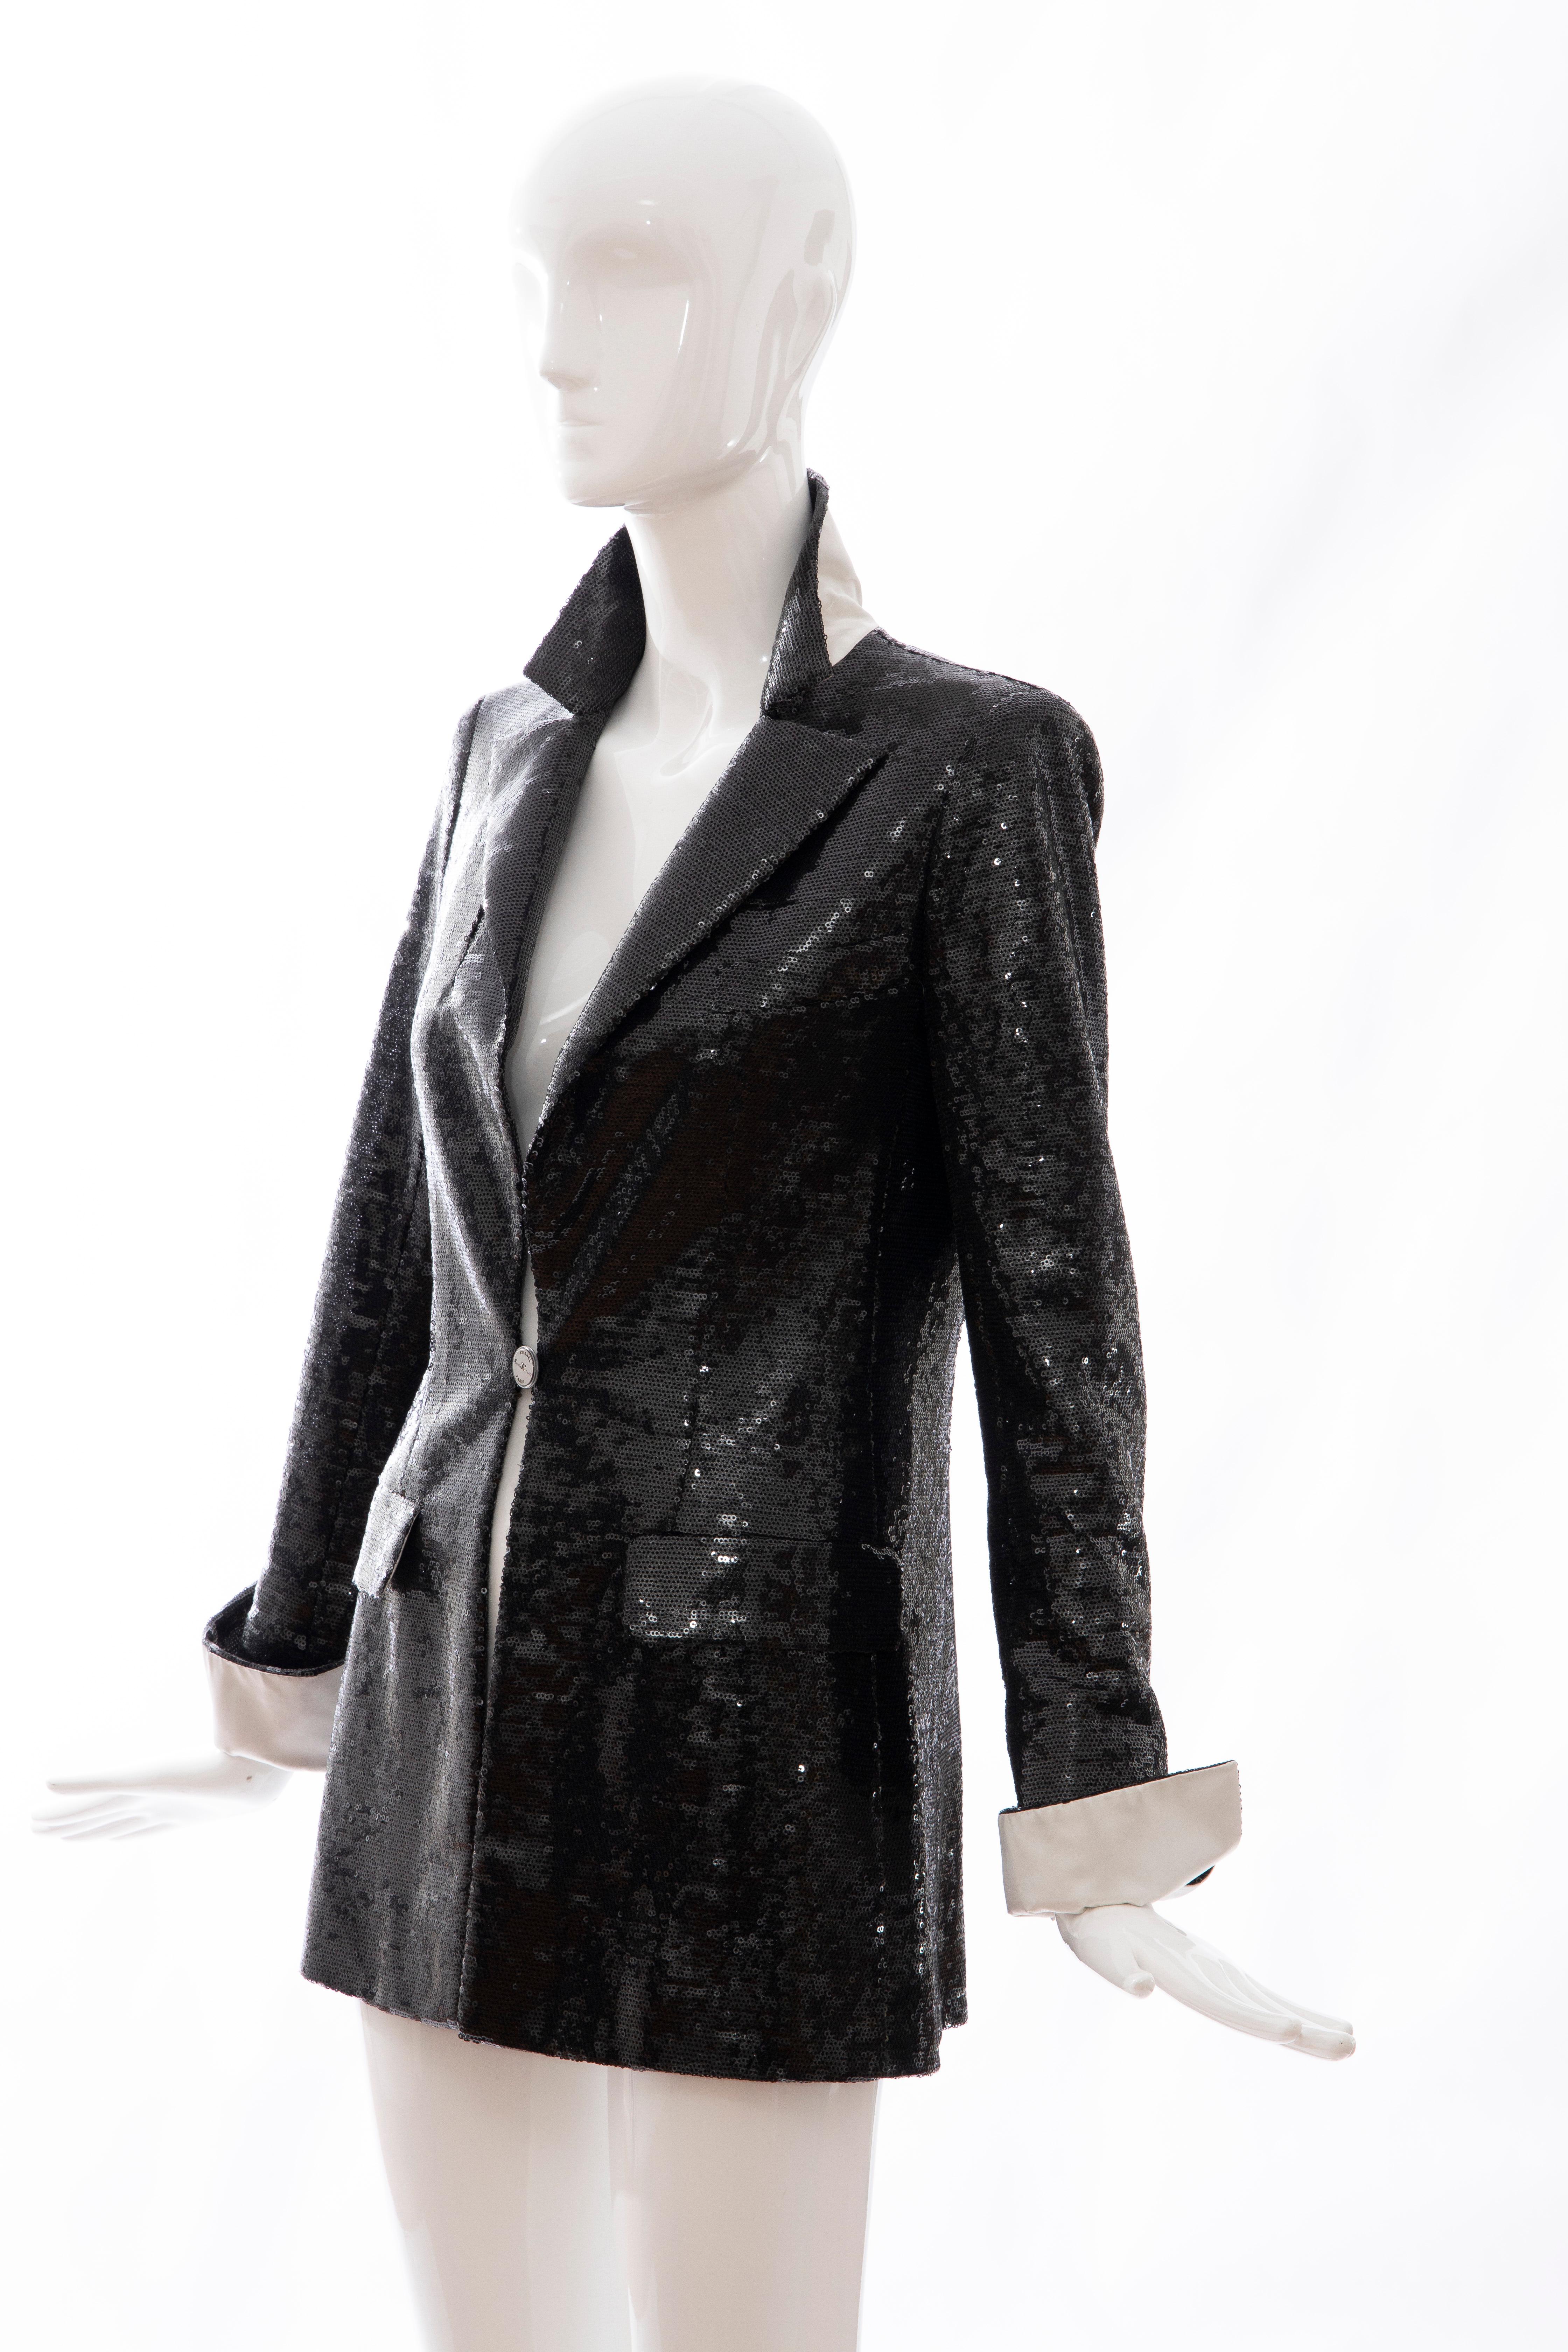 Chanel Black Embroidered Sequin Evening Jacket Ivory Silk Cuffs, Cruise 2009 For Sale 3